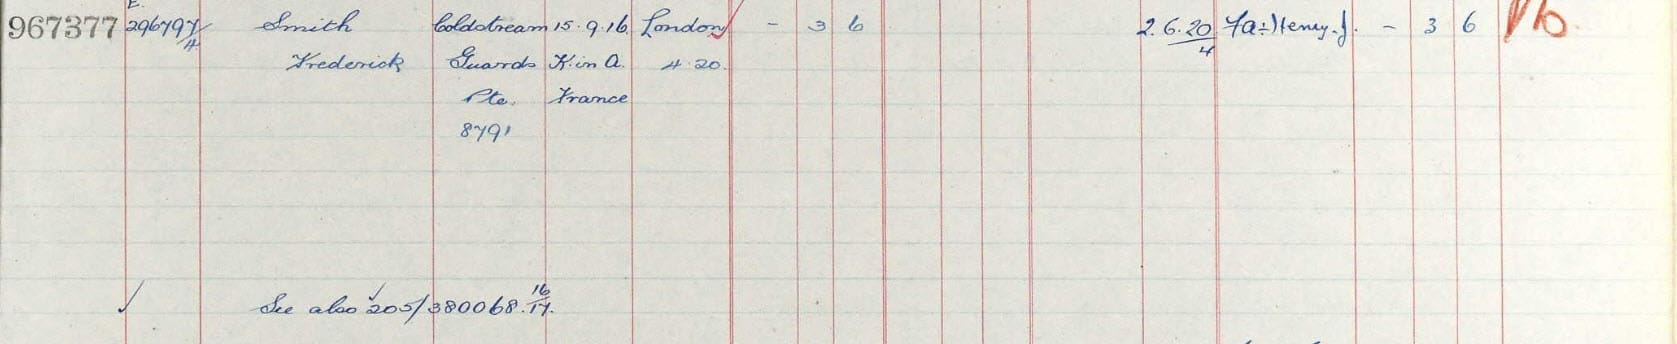 uk army registers of soldiers effects 1901 1929 for frederick smith